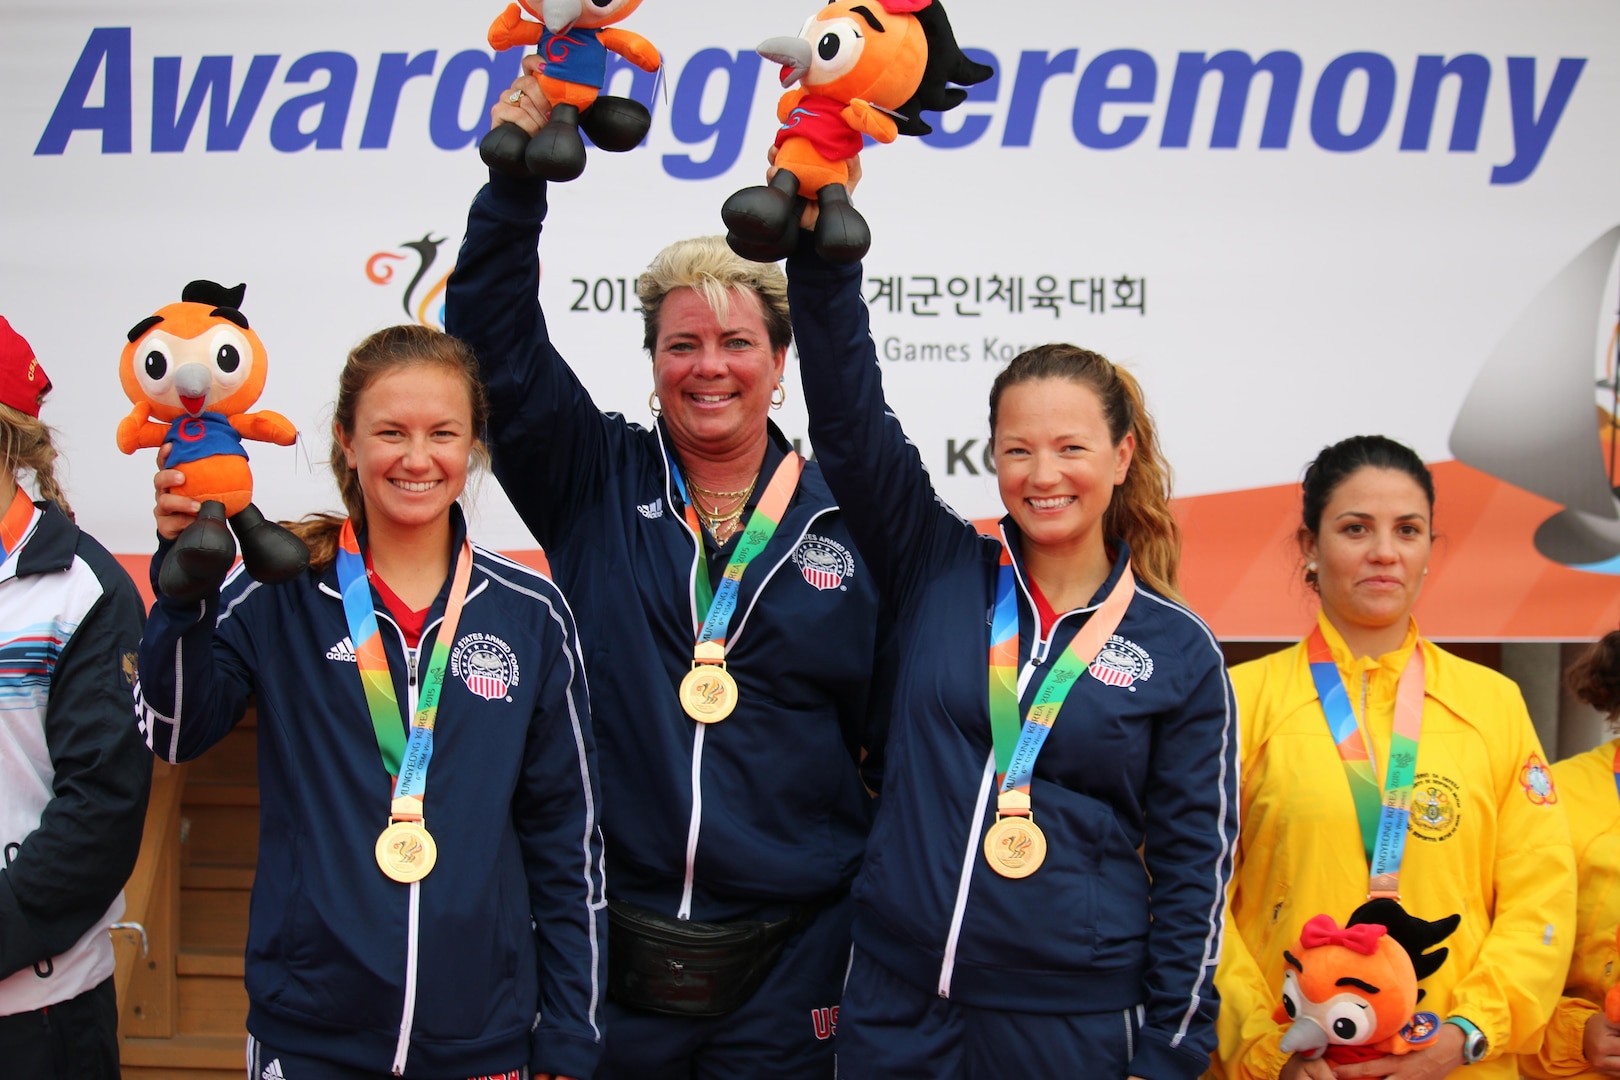 U.S. Women's Sailing Team capture the gold medal over Russia during the 6th Conseil International du Sport Militaire (CISM) Military World Games in Pohang, South Korea 2-11 October.  Skipper Navy Ensign Mary Hall (left) and crewmember Navy Lieutenant Trisha Kutkiewicz earned placed higher in 11 races, defeating Russia by one point.  The U.S. Women's Sailing team was the first official medal of the World Games for the U.S.